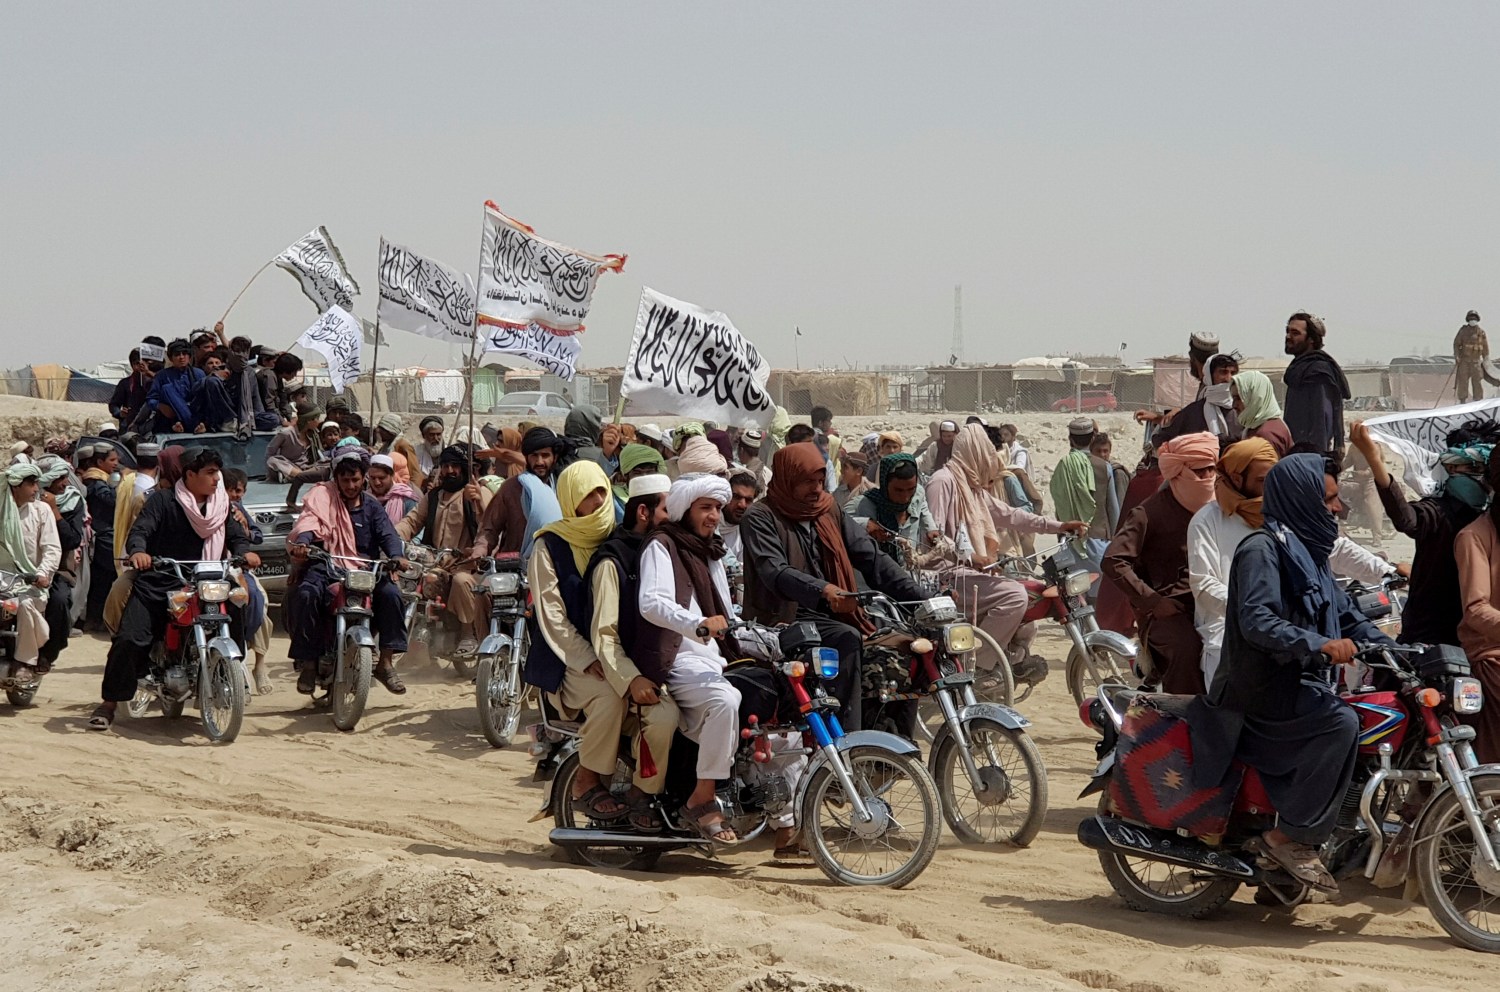 People on vehicles, holding Taliban flags, gather near the Friendship Gate crossing point in the Pakistan-Afghanistan border town of Chaman, Pakistan July 14, 2021. Picture taken July 14, 2021. REUTERS/Abdul Khaliq Achakzai